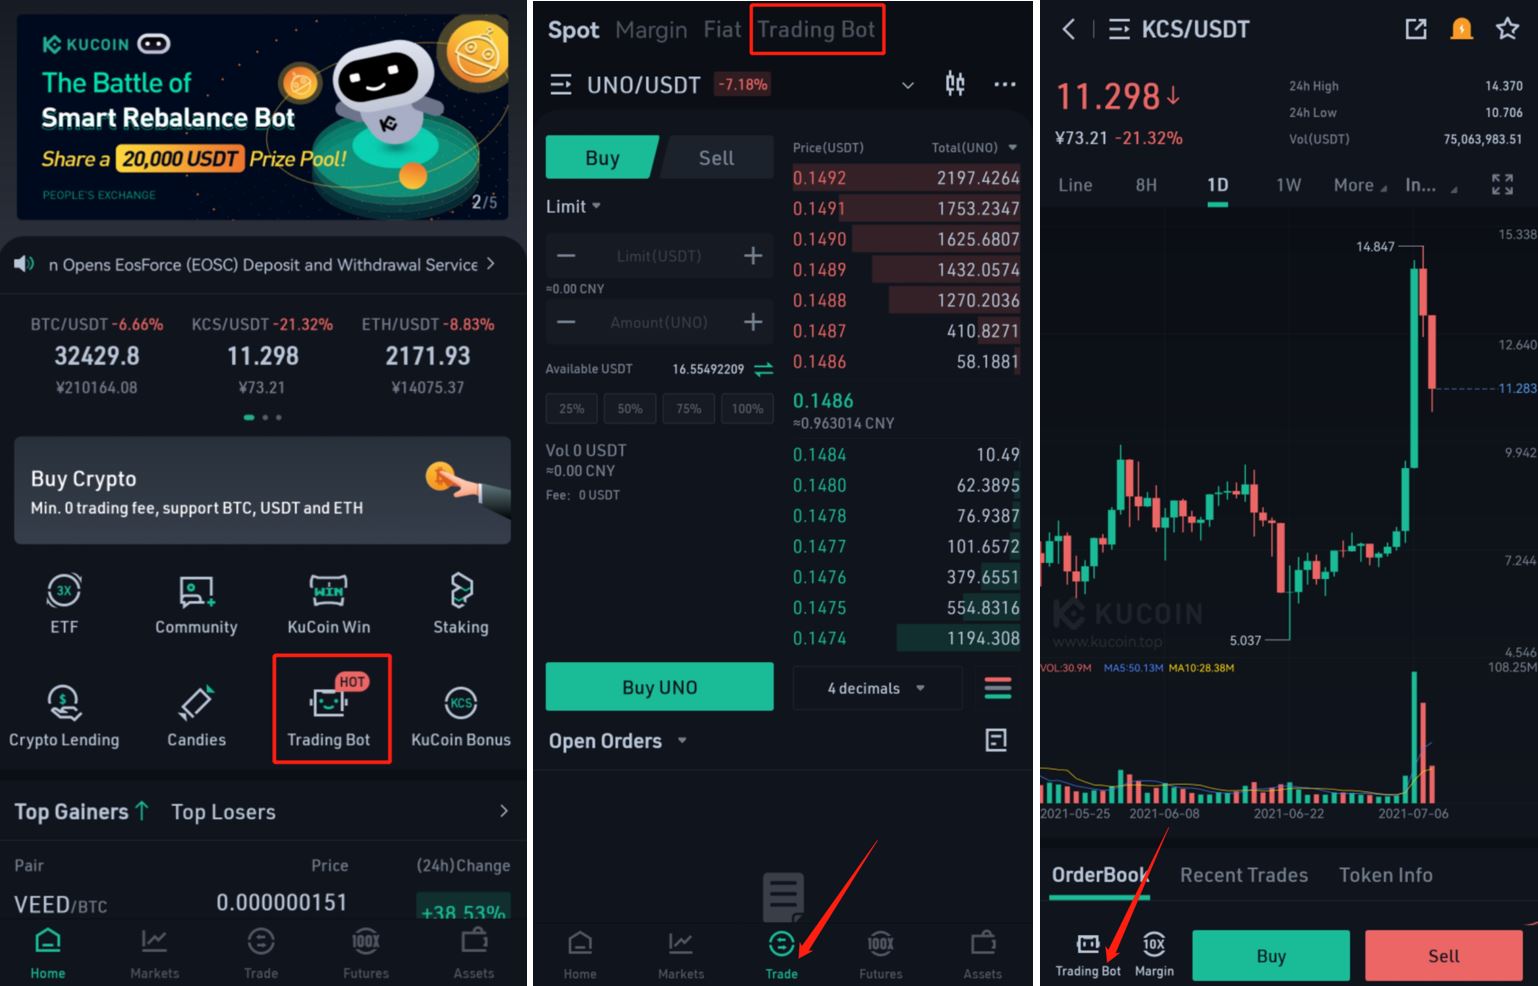 How To Set Up Trading Bot on Kucoin? - Coinapult